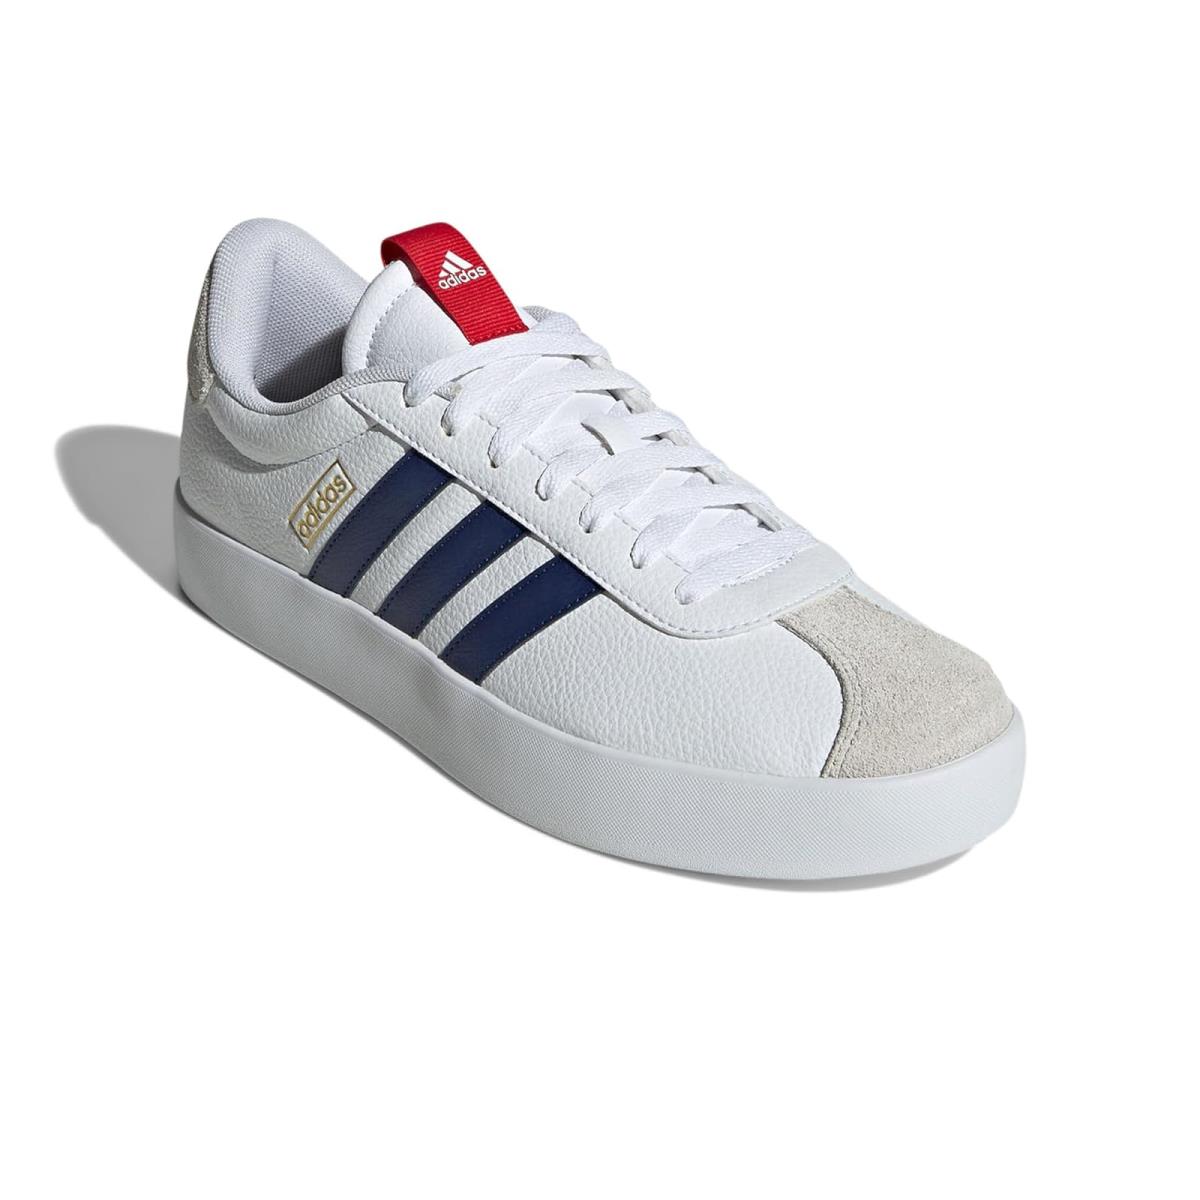 Man`s Sneakers Athletic Shoes Adidas VL Court 3.0 White/Dark Blue/Better Scarlet